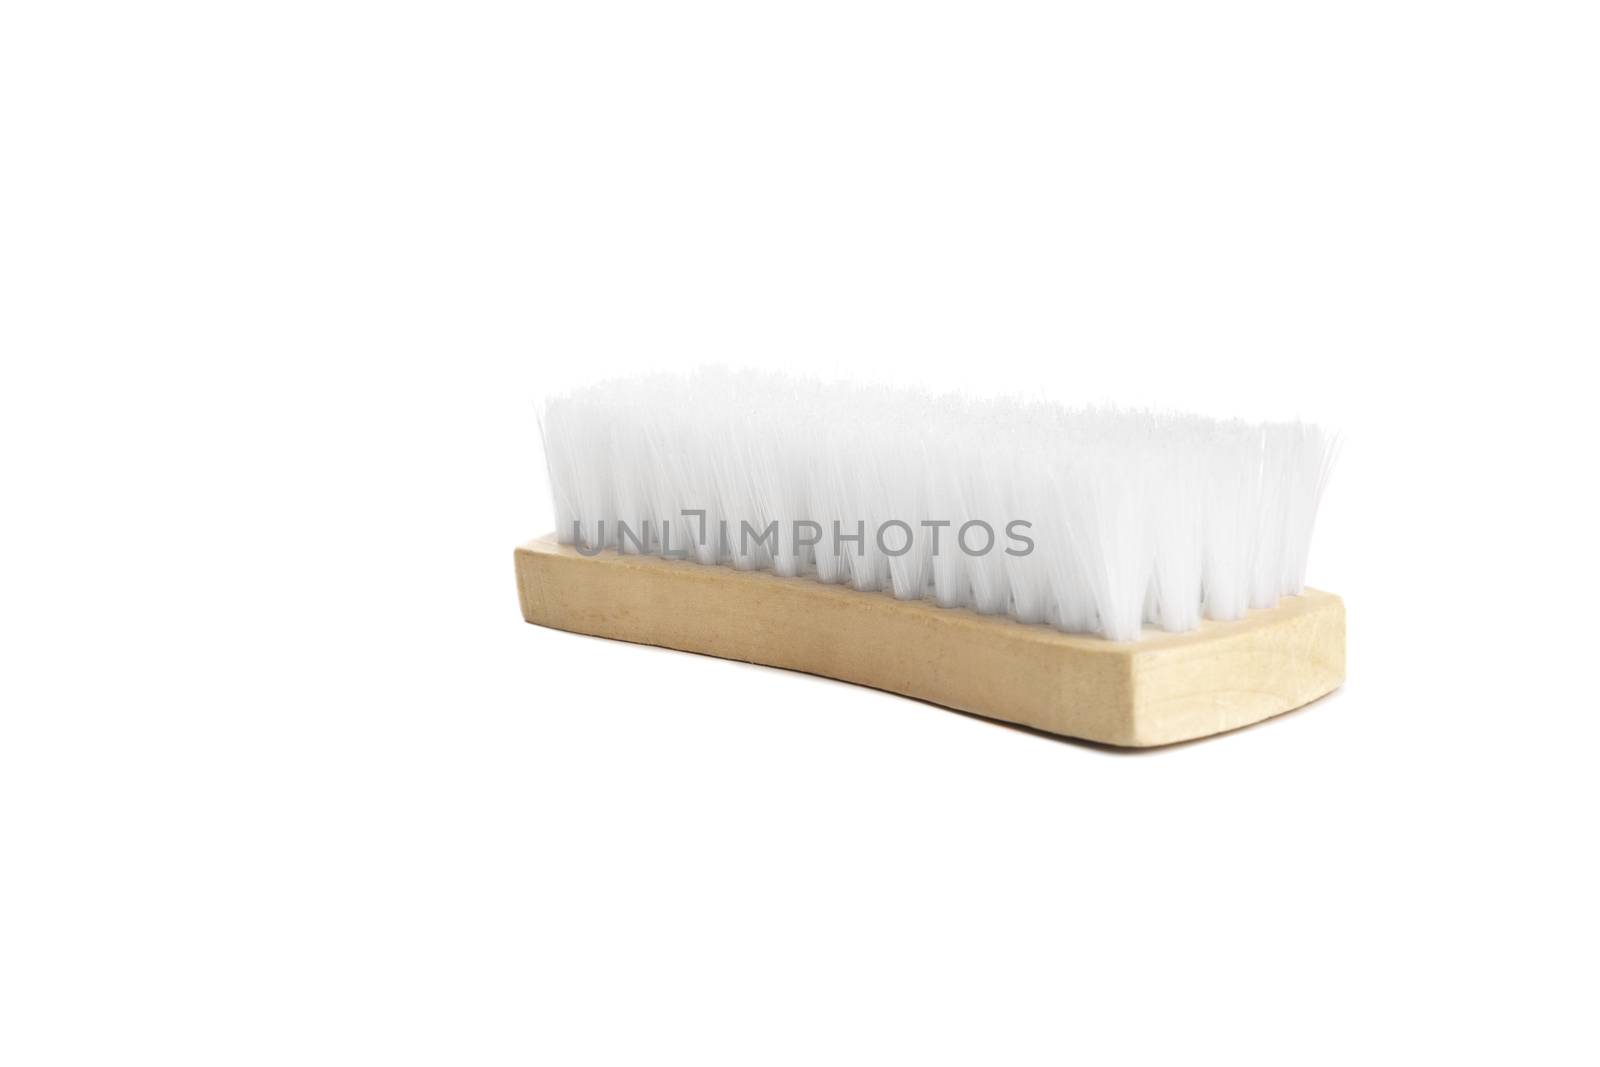 clothes cleaning brush isolated on white background